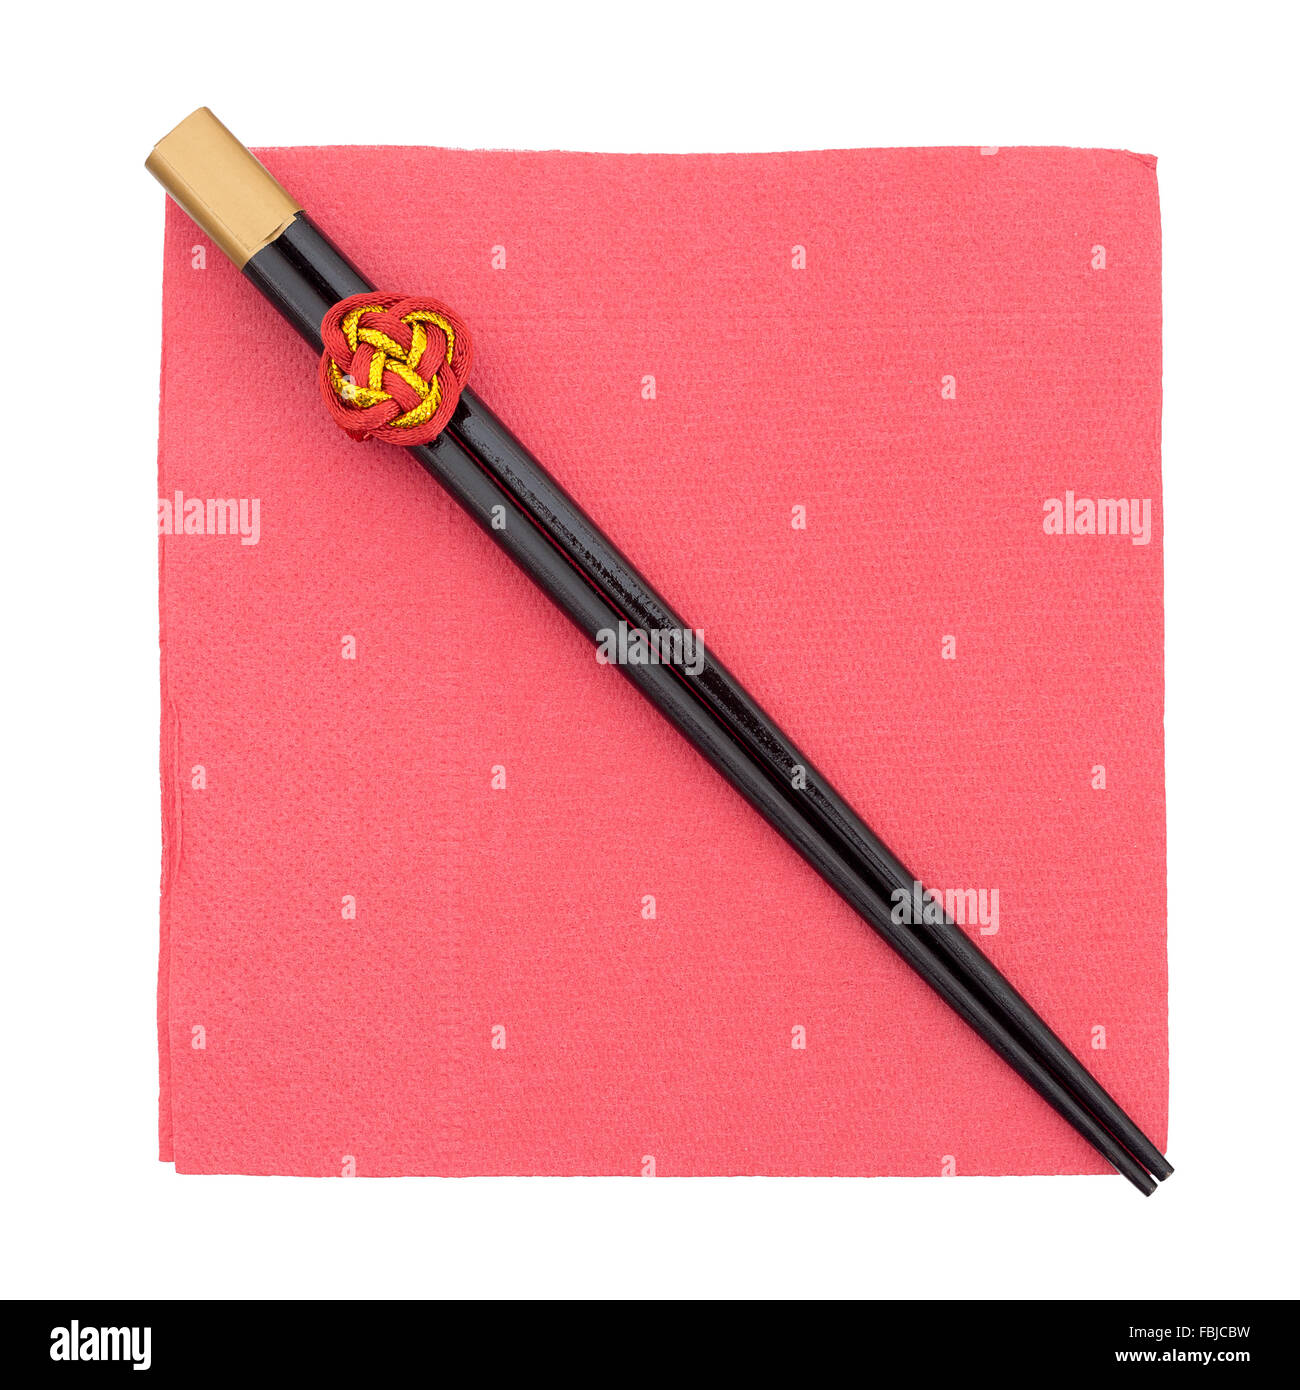 Chopsticks on red serviette, napkin. With lucky knot. Isolated on white. Stock Photo